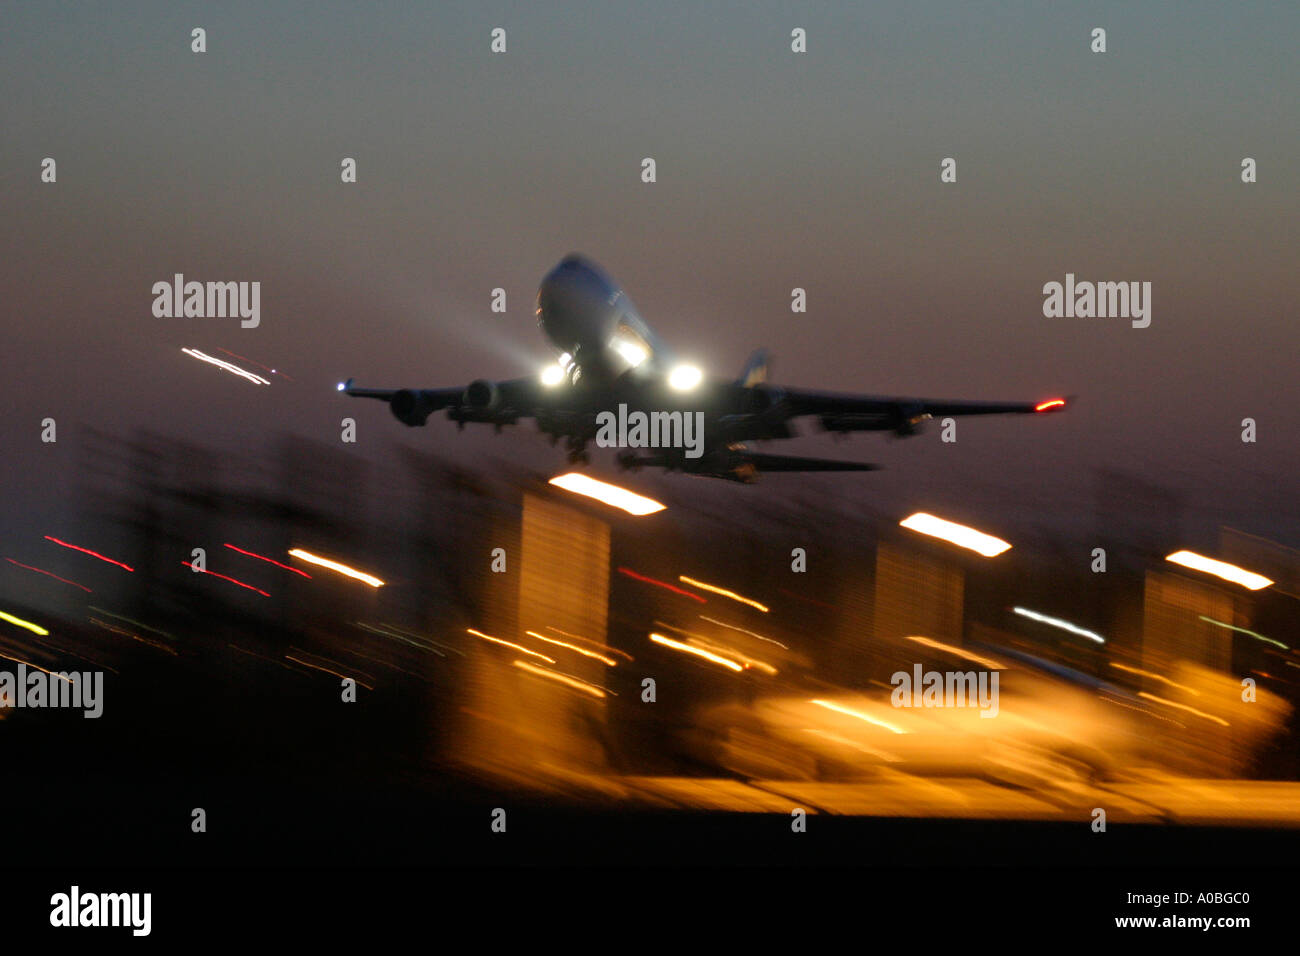 Airliner taking off at night Stock Photo